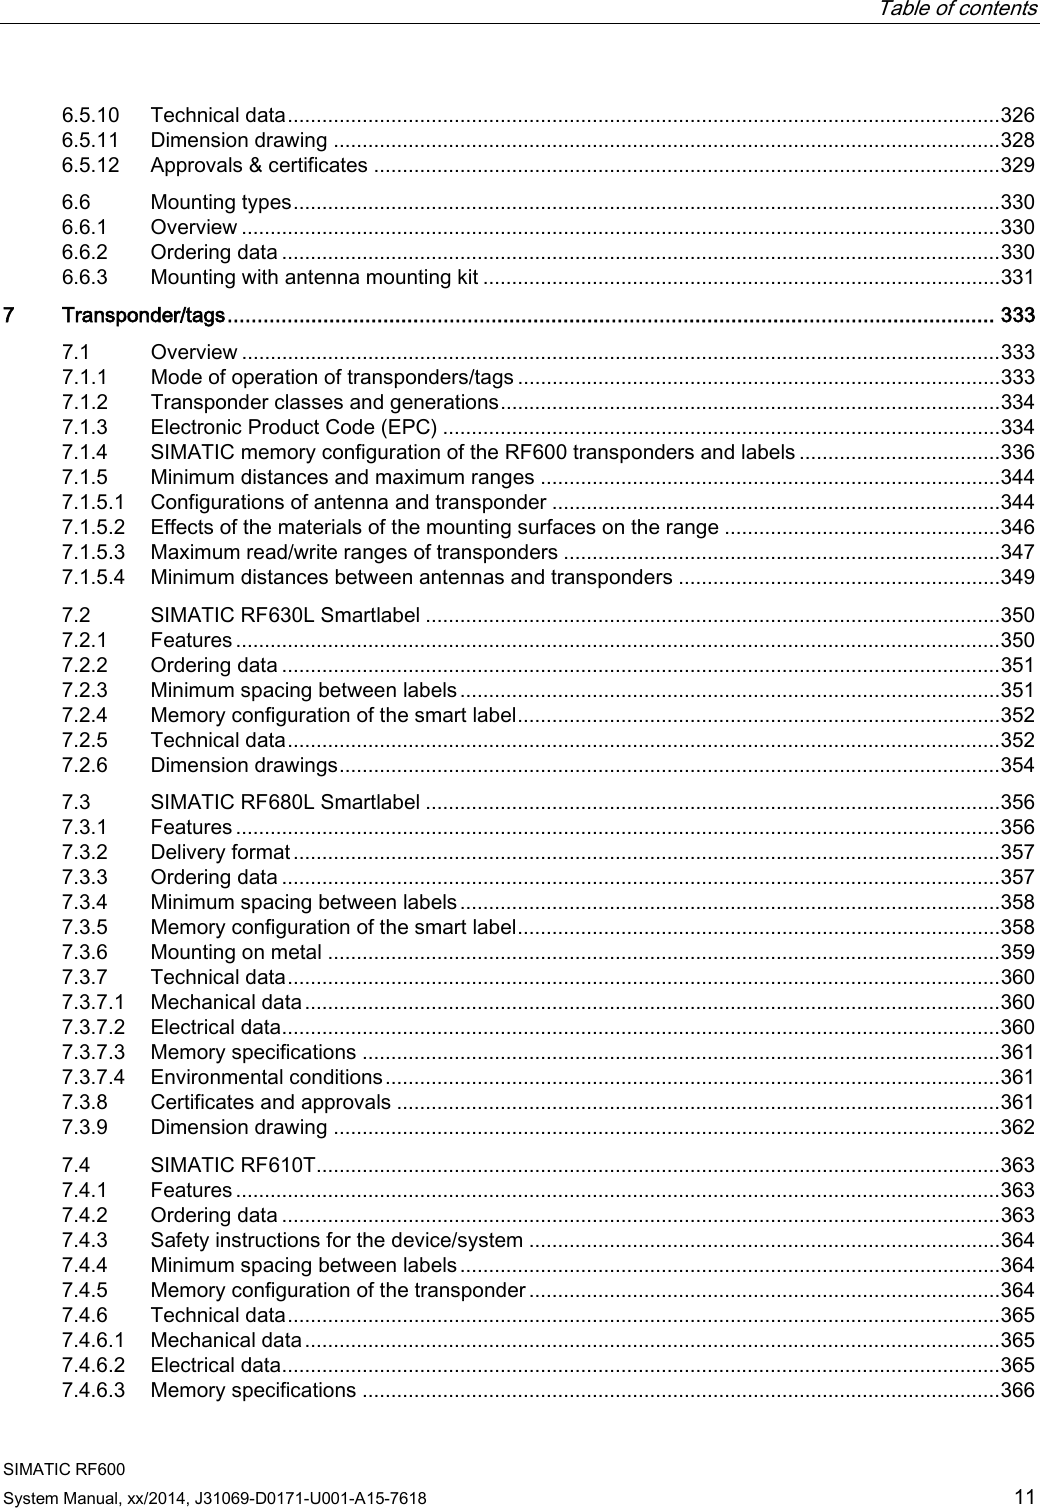  Table of contents   SIMATIC RF600 System Manual, xx/2014, J31069-D0171-U001-A15-7618 11 6.5.10 Technical data ............................................................................................................................ 326 6.5.11 Dimension drawing .................................................................................................................... 328 6.5.12 Approvals &amp; certificates ............................................................................................................. 329 6.6 Mounting types ........................................................................................................................... 330 6.6.1 Overview .................................................................................................................................... 330 6.6.2 Ordering data ............................................................................................................................. 330 6.6.3 Mounting with antenna mounting kit .......................................................................................... 331 7  Transponder/tags ................................................................................................................................ 333 7.1 Overview .................................................................................................................................... 333 7.1.1 Mode of operation of transponders/tags .................................................................................... 333 7.1.2 Transponder classes and generations ....................................................................................... 334 7.1.3 Electronic Product Code (EPC) ................................................................................................. 334 7.1.4 SIMATIC memory configuration of the RF600 transponders and labels ................................... 336 7.1.5 Minimum distances and maximum ranges ................................................................................ 344 7.1.5.1 Configurations of antenna and transponder .............................................................................. 344 7.1.5.2 Effects of the materials of the mounting surfaces on the range ................................................ 346 7.1.5.3 Maximum read/write ranges of transponders ............................................................................ 347 7.1.5.4 Minimum distances between antennas and transponders ........................................................ 349 7.2 SIMATIC RF630L Smartlabel .................................................................................................... 350 7.2.1 Features ..................................................................................................................................... 350 7.2.2 Ordering data ............................................................................................................................. 351 7.2.3 Minimum spacing between labels .............................................................................................. 351 7.2.4 Memory configuration of the smart label .................................................................................... 352 7.2.5 Technical data ............................................................................................................................ 352 7.2.6 Dimension drawings ................................................................................................................... 354 7.3 SIMATIC RF680L Smartlabel .................................................................................................... 356 7.3.1 Features ..................................................................................................................................... 356 7.3.2 Delivery format ........................................................................................................................... 357 7.3.3 Ordering data ............................................................................................................................. 357 7.3.4 Minimum spacing between labels .............................................................................................. 358 7.3.5 Memory configuration of the smart label .................................................................................... 358 7.3.6 Mounting on metal ..................................................................................................................... 359 7.3.7 Technical data ............................................................................................................................ 360 7.3.7.1 Mechanical data ......................................................................................................................... 360 7.3.7.2 Electrical data ............................................................................................................................. 360 7.3.7.3 Memory specifications ............................................................................................................... 361 7.3.7.4 Environmental conditions ........................................................................................................... 361 7.3.8 Certificates and approvals ......................................................................................................... 361 7.3.9 Dimension drawing .................................................................................................................... 362 7.4 SIMATIC RF610T....................................................................................................................... 363 7.4.1 Features ..................................................................................................................................... 363 7.4.2 Ordering data ............................................................................................................................. 363 7.4.3 Safety instructions for the device/system .................................................................................. 364 7.4.4 Minimum spacing between labels .............................................................................................. 364 7.4.5 Memory configuration of the transponder .................................................................................. 364 7.4.6 Technical data ............................................................................................................................ 365 7.4.6.1 Mechanical data ......................................................................................................................... 365 7.4.6.2 Electrical data ............................................................................................................................. 365 7.4.6.3 Memory specifications ............................................................................................................... 366 